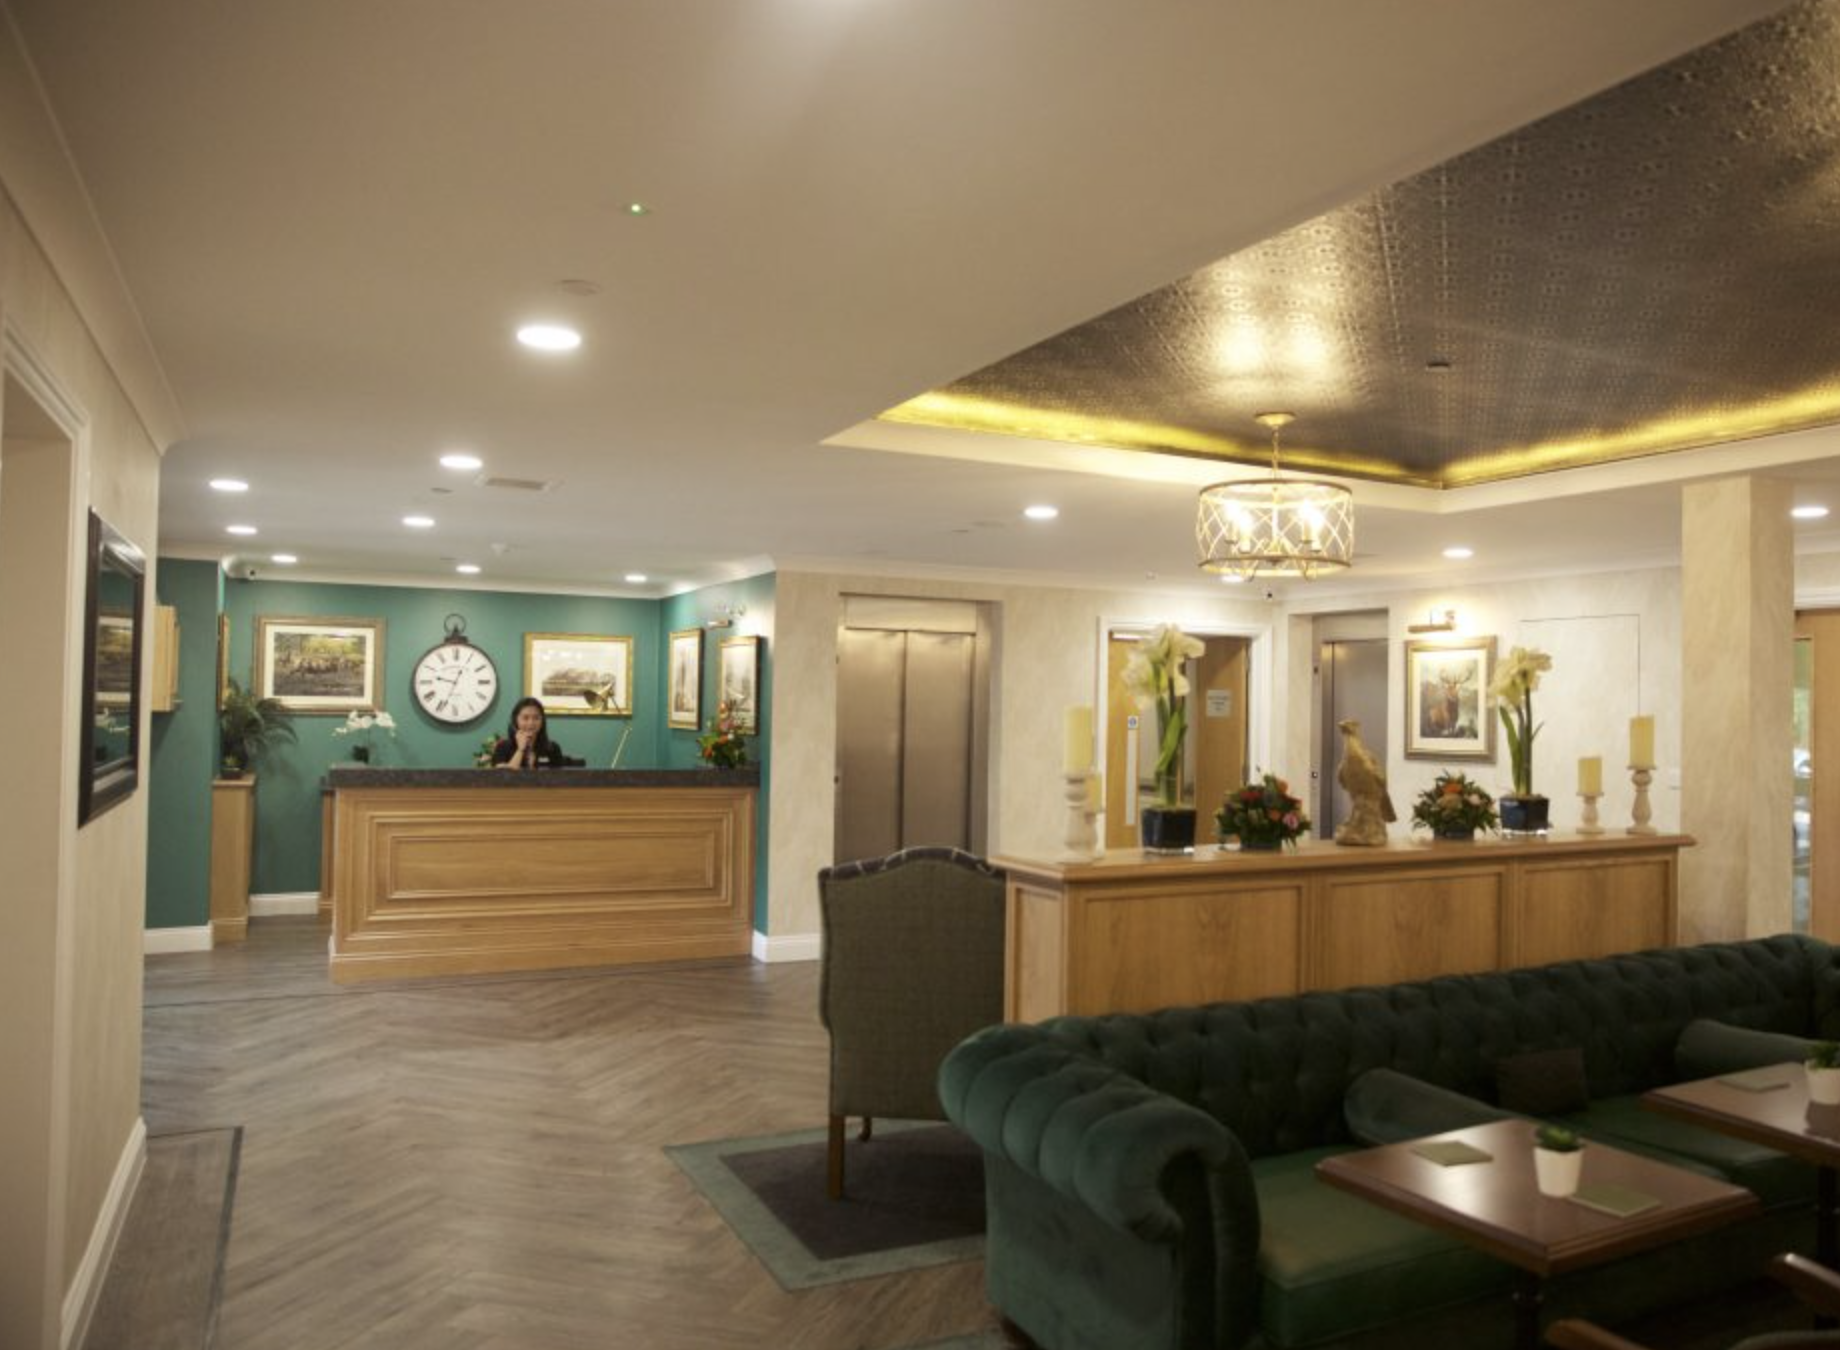 Reception of Carlton Court care home in Barnet, London